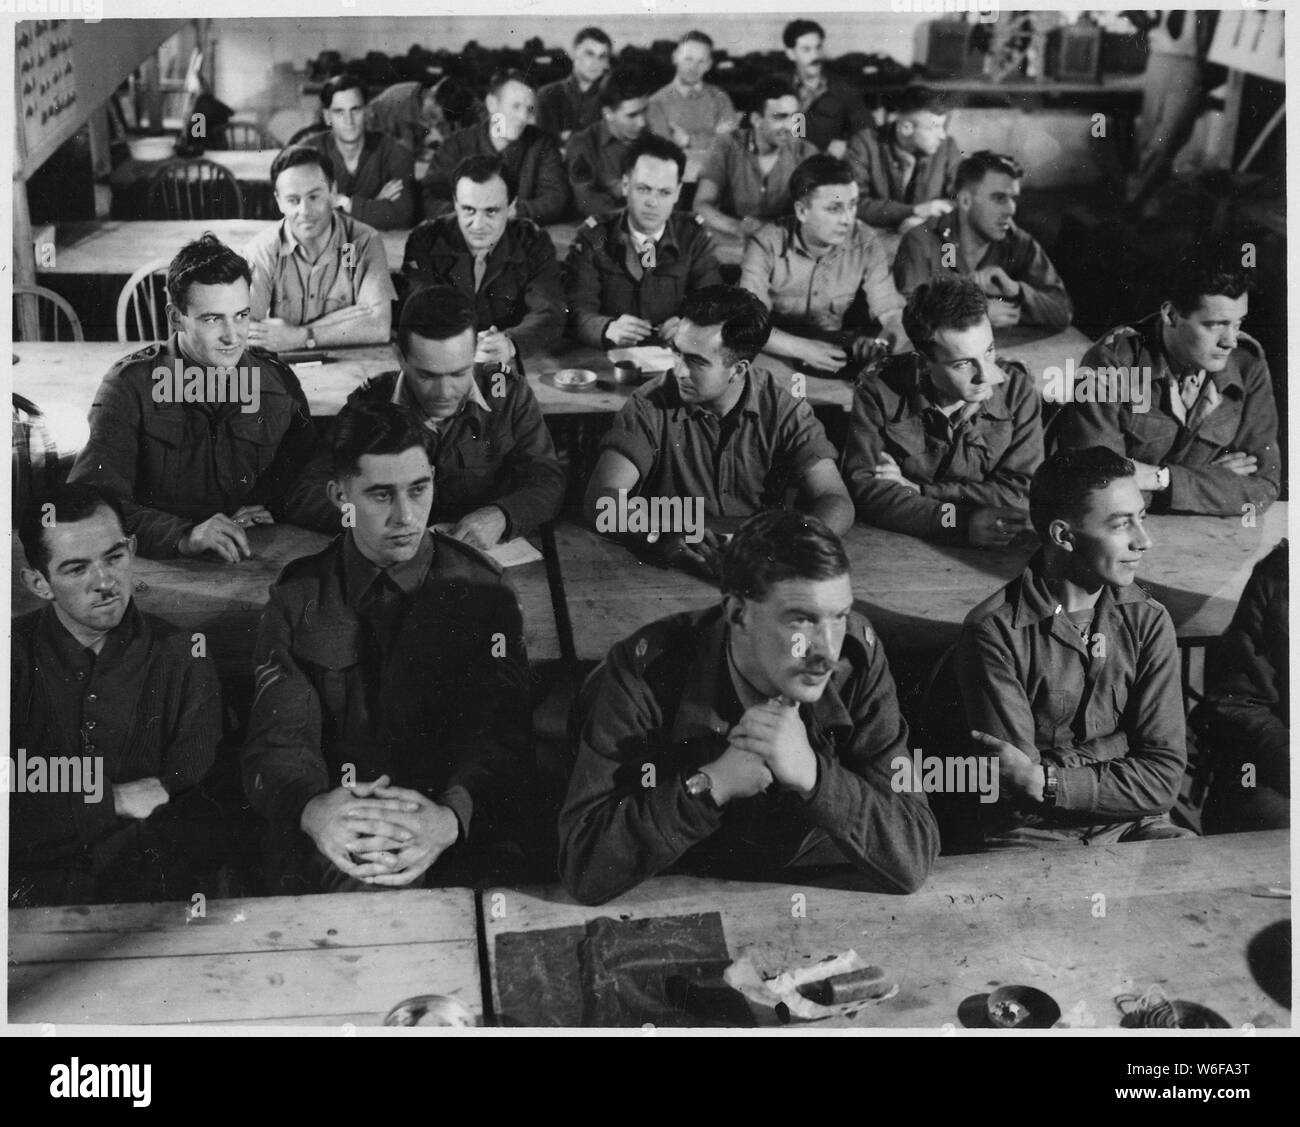 Audience in demolition class. Milton Hall, England, circa 1944., 1943 - 1944; General notes:  Use War and Conflict Number 738 when ordering a reproduction or requesting information about this image. Stock Photo